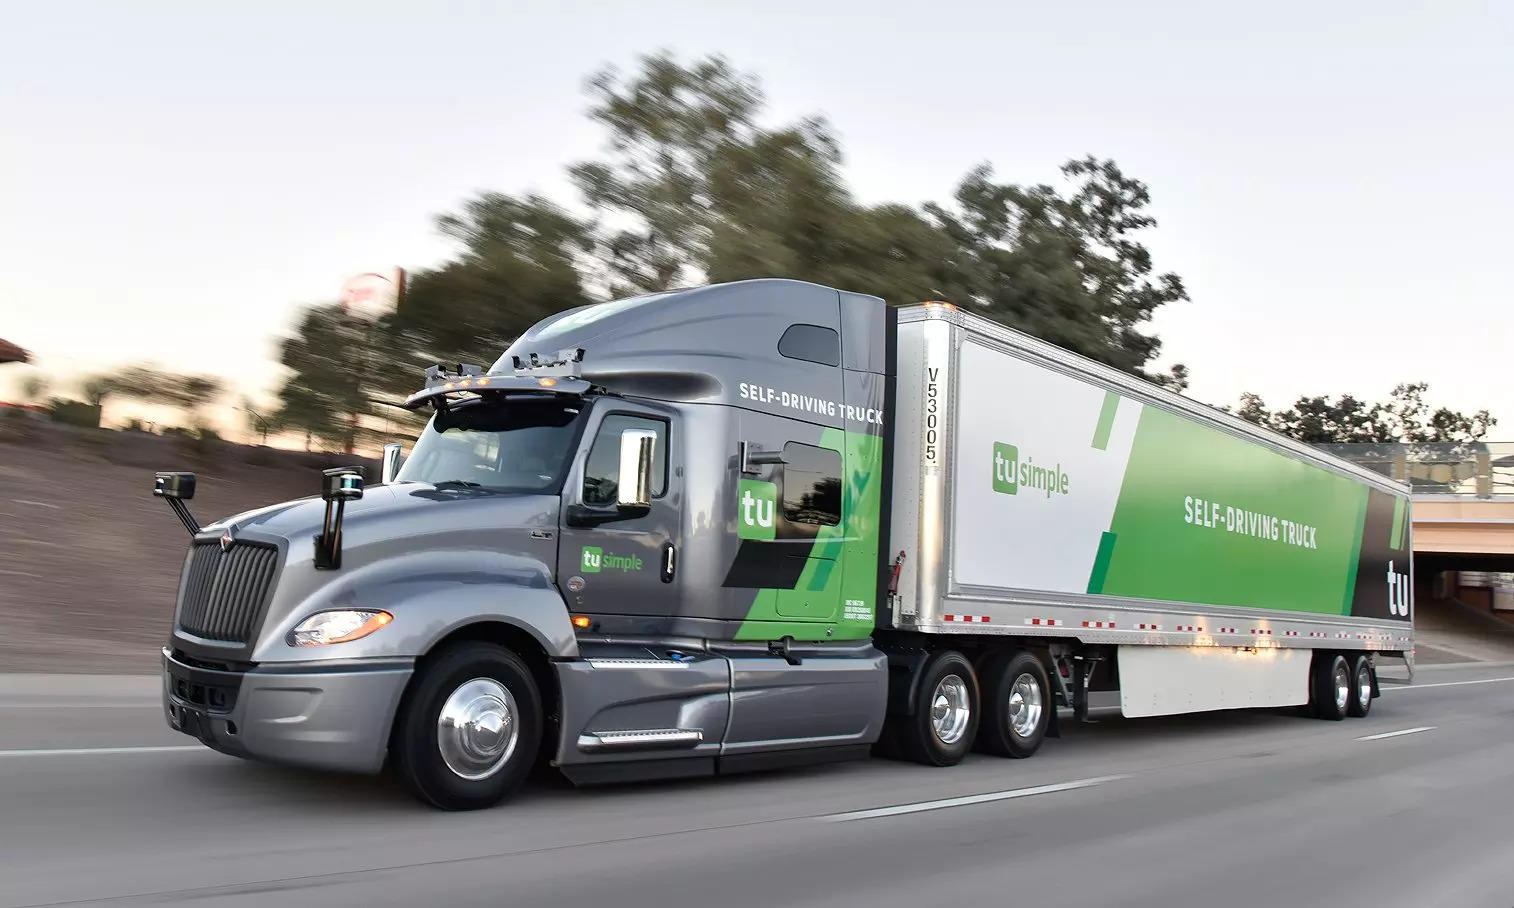 Self-driving truck technology company TuSimple Holdings Inc 